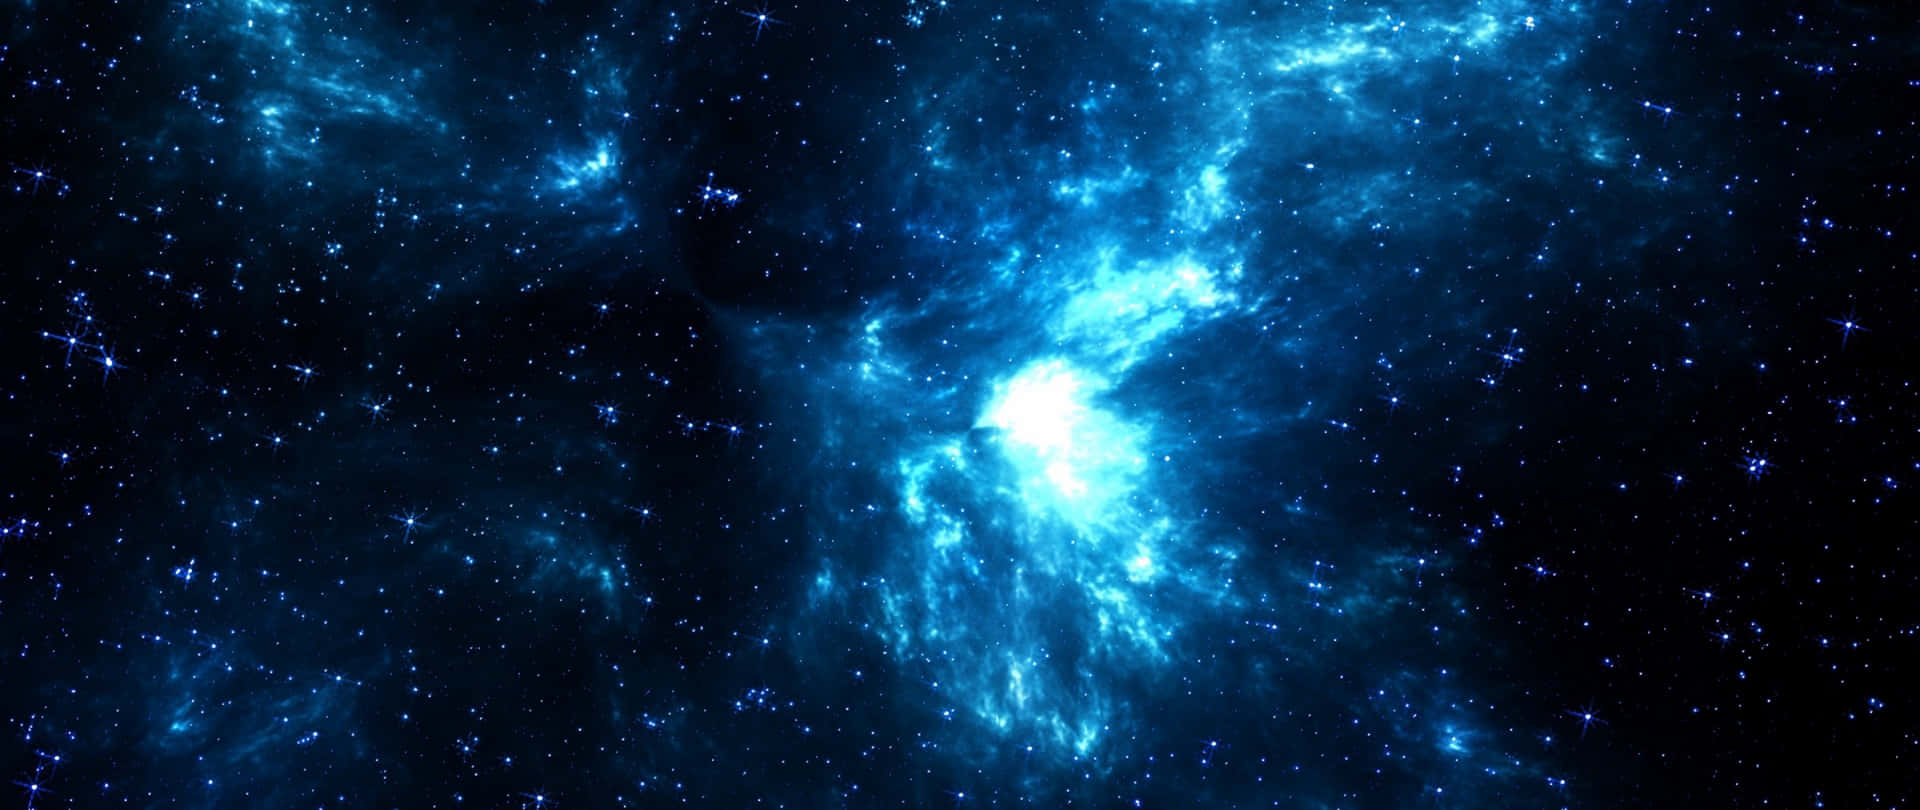 Download Explore the Green and Blue Galaxy Wallpaper | Wallpapers.com